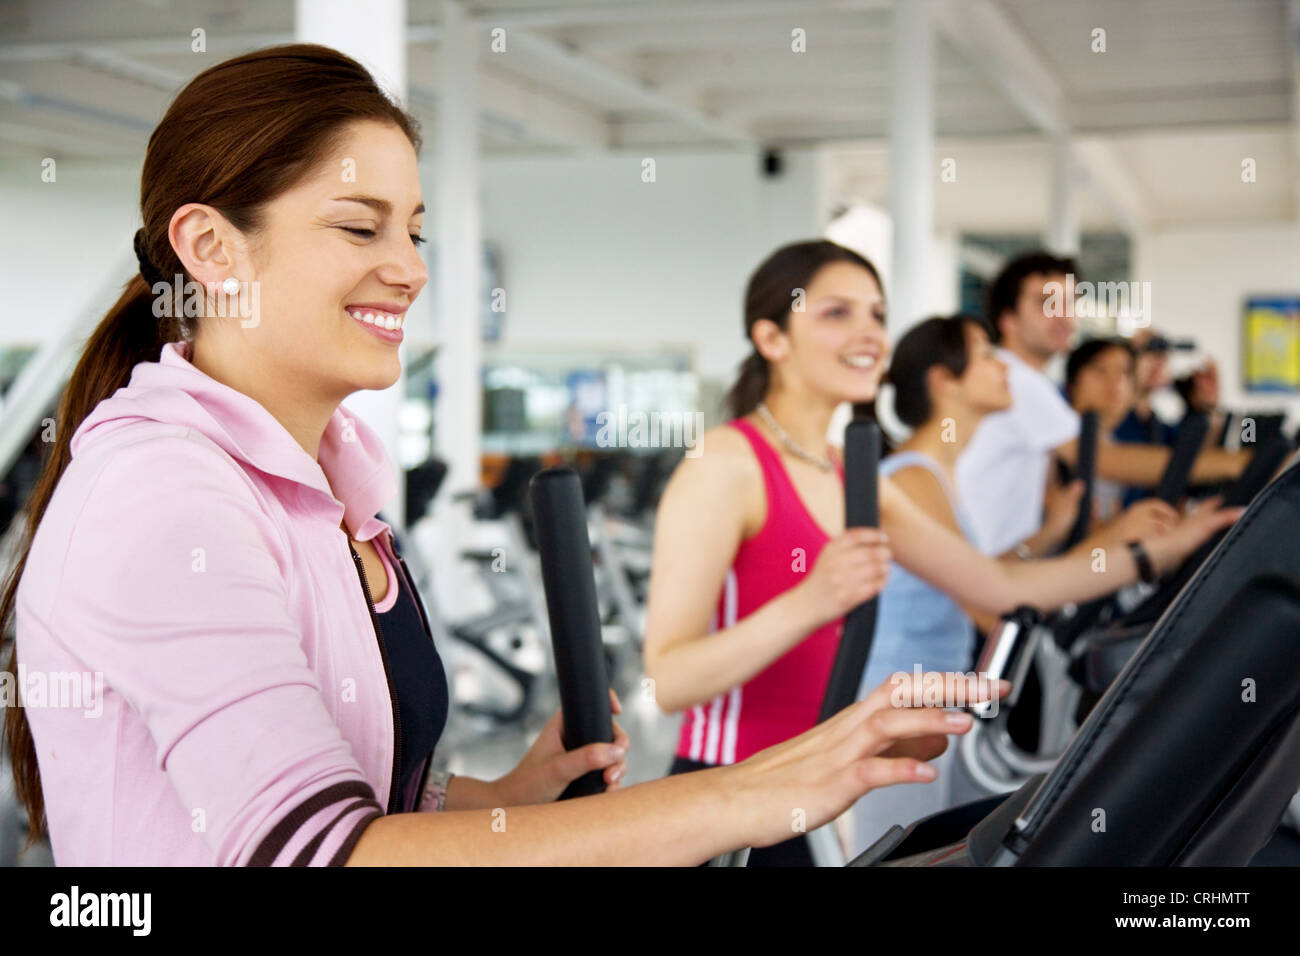 Young Woman after Workout in Gym Stock Photo - Image of building, exercising:  61197534